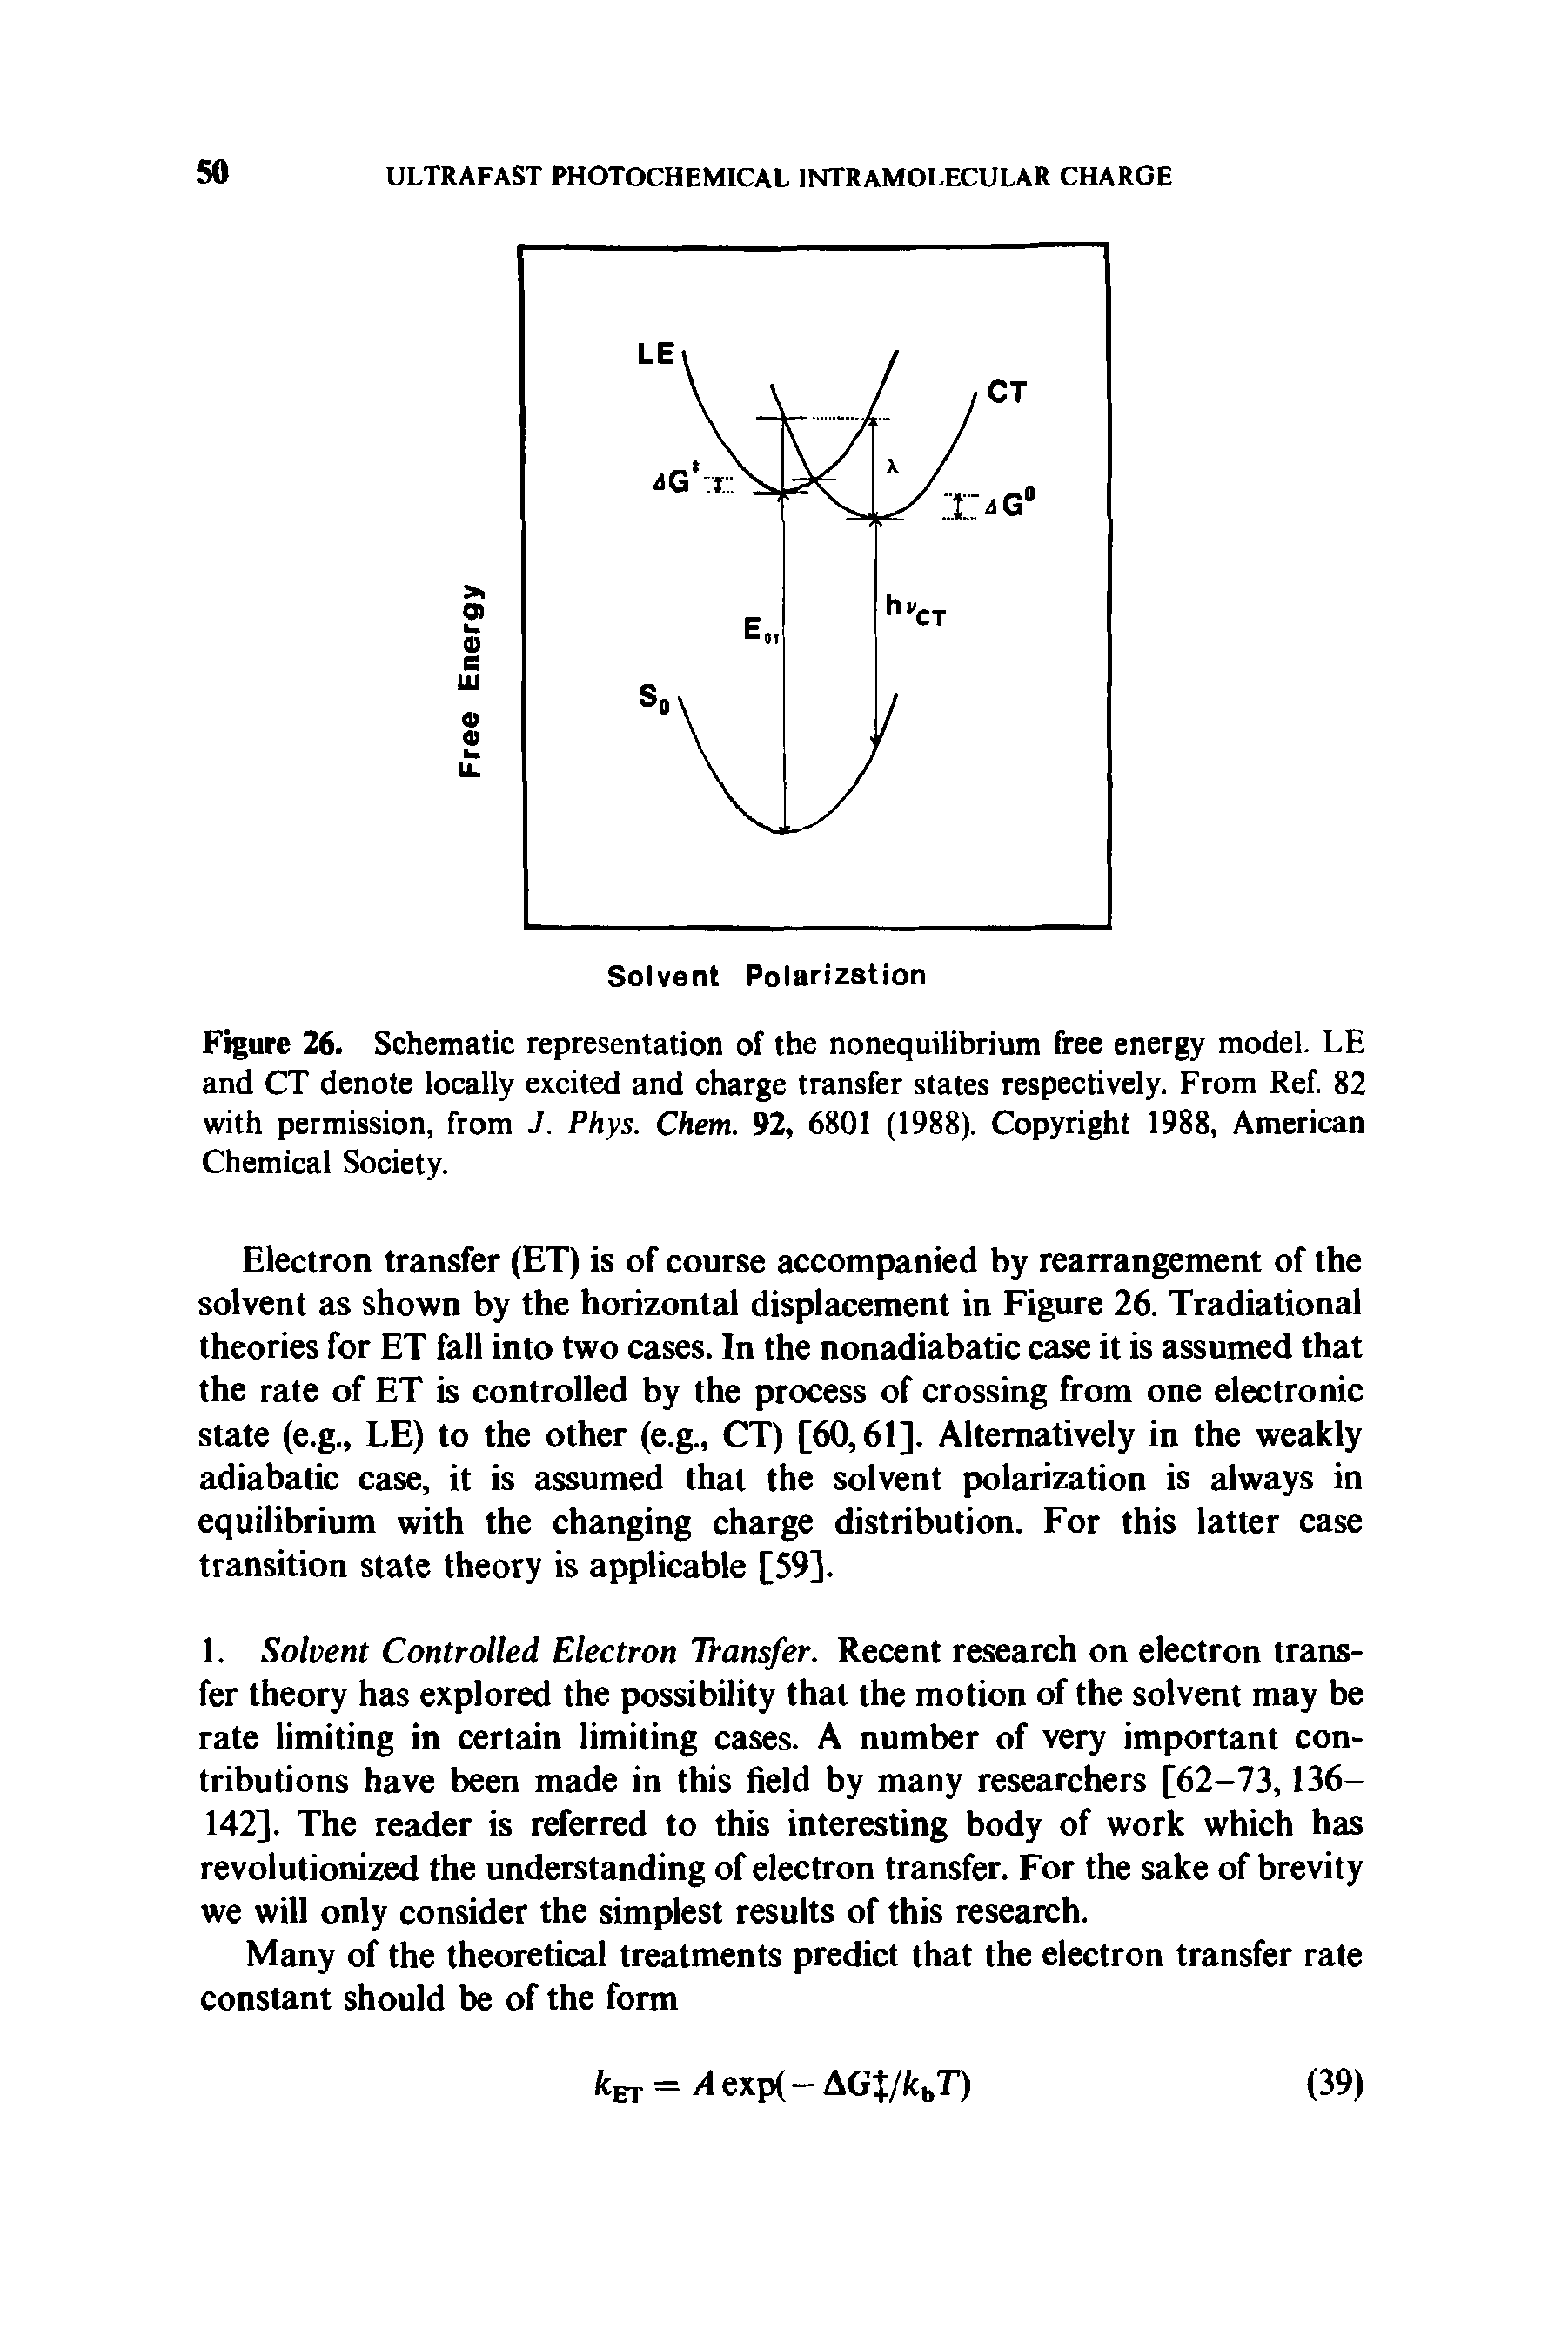 Figure 26. Schematic representation of the nonequilibrium free energy model. LE and CT denote locally excited and charge transfer states respectively. From Ref. 82 with permission, from J. Phys. Chem. 92, 6801 (1988). Copyright 1988, American Chemical Society.